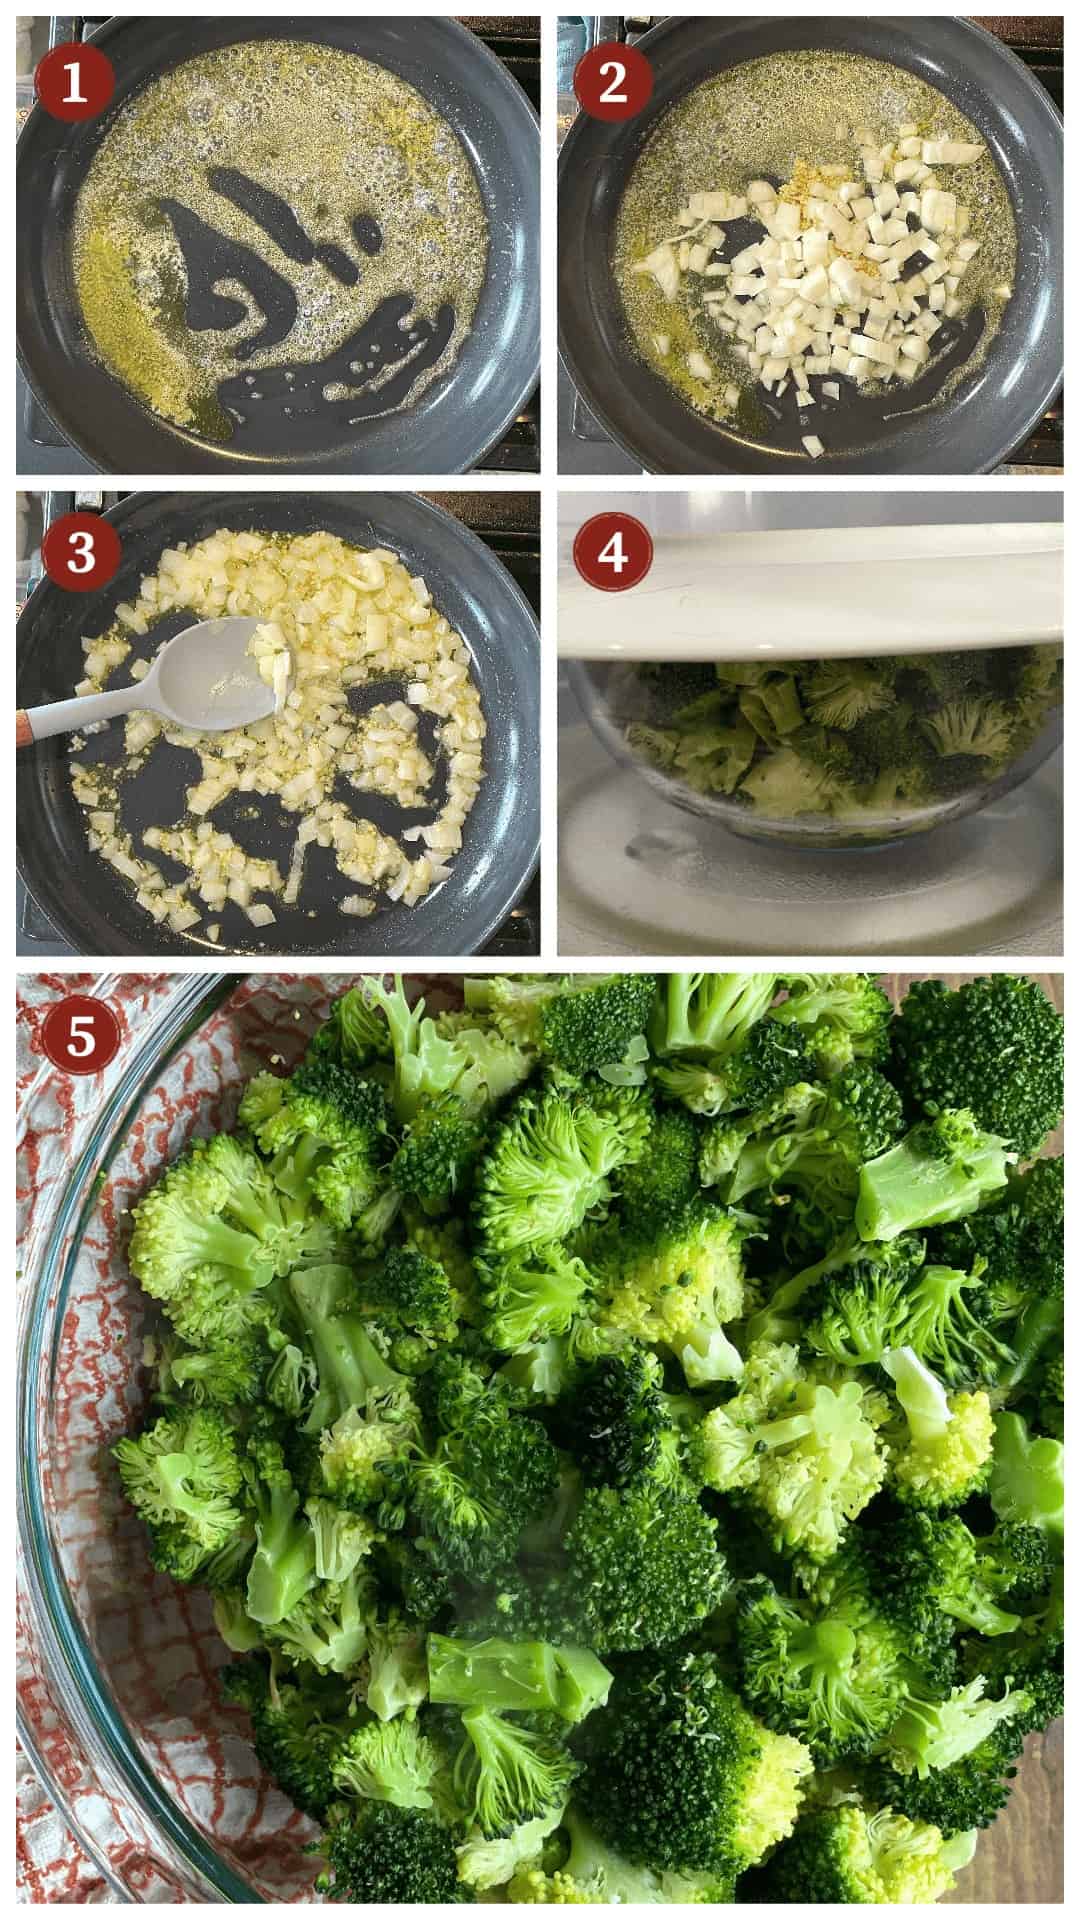 A collage of images showing how to make broccoli casserole, steps 1-5.